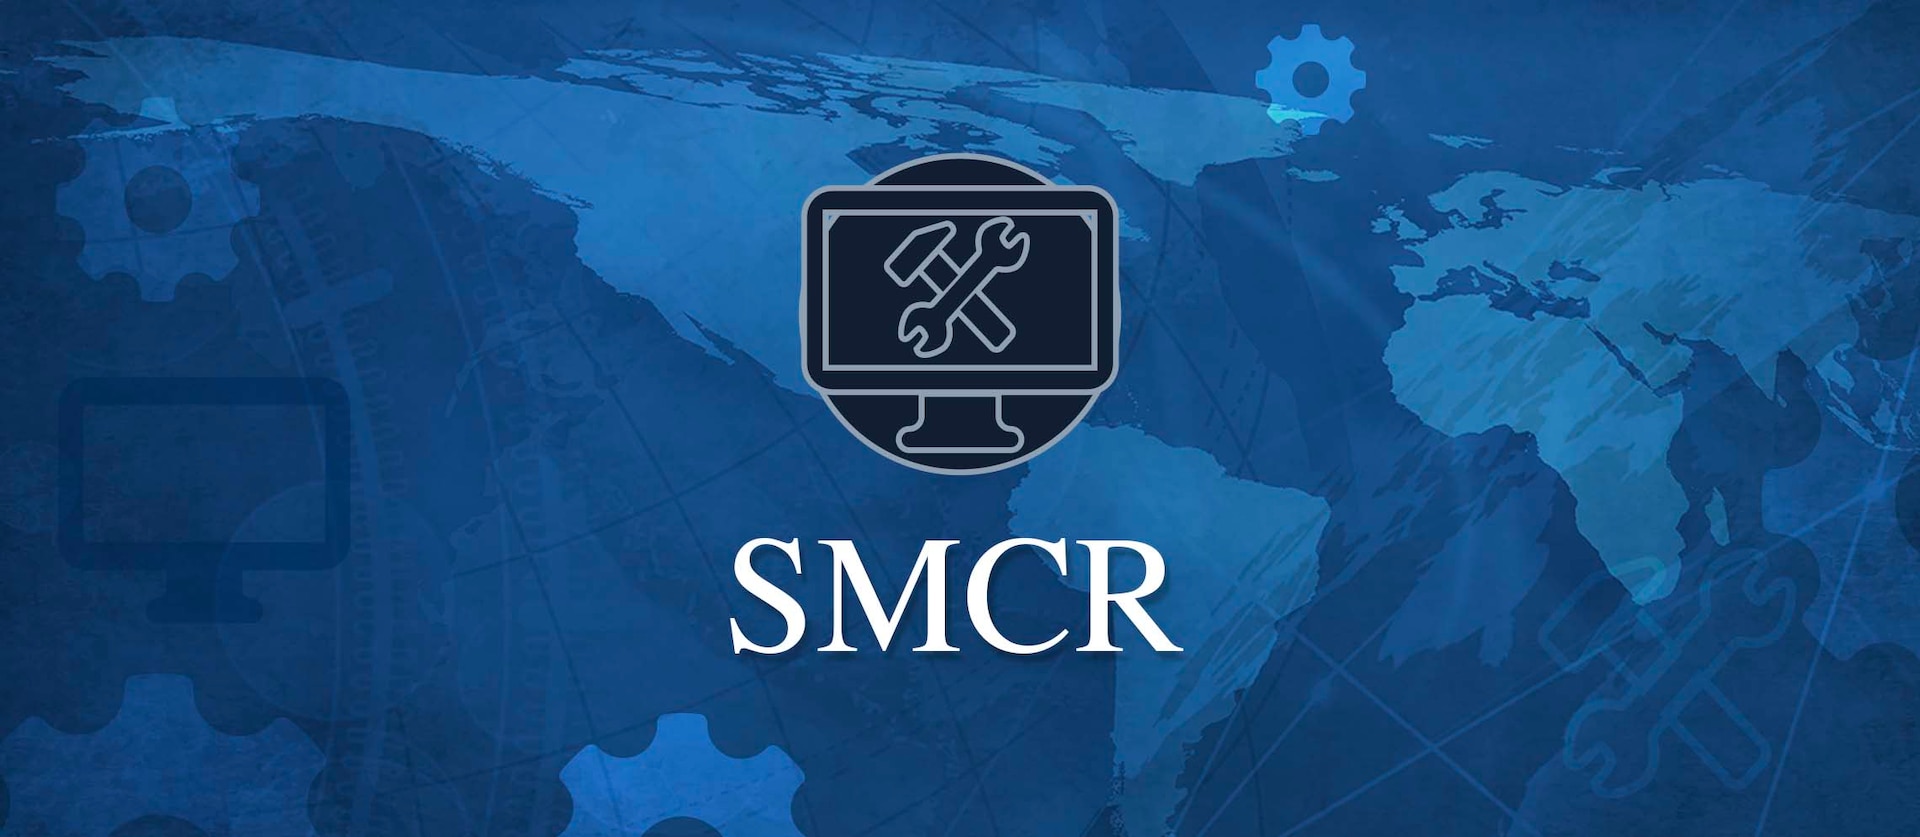 Application graphic for SMCR